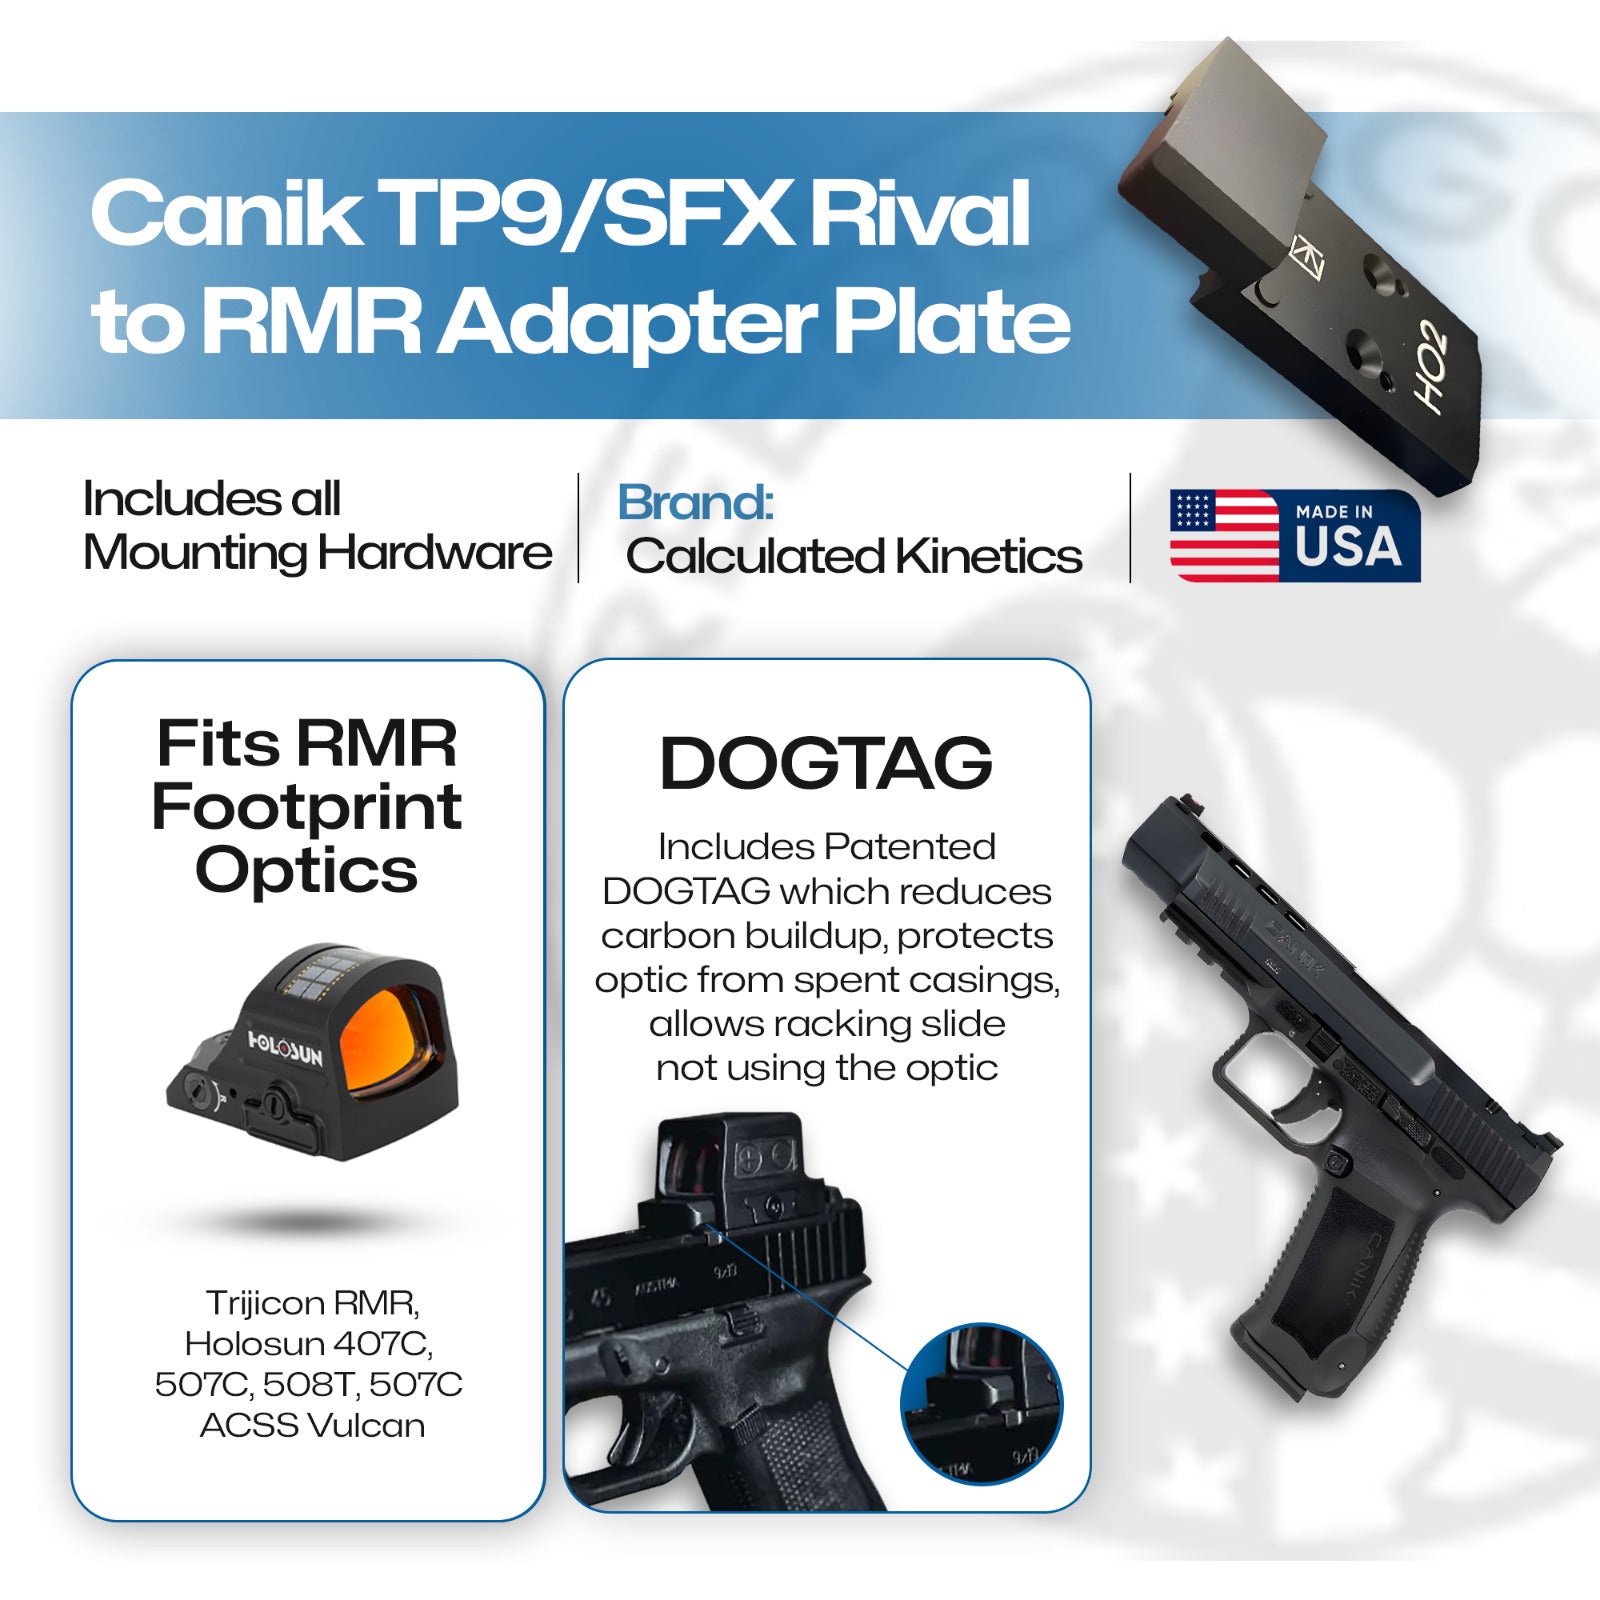 Canik TP9 and SFX Rival RMR Adapter Plate - DOGTAG - Aluminum - Calculated Kinetics